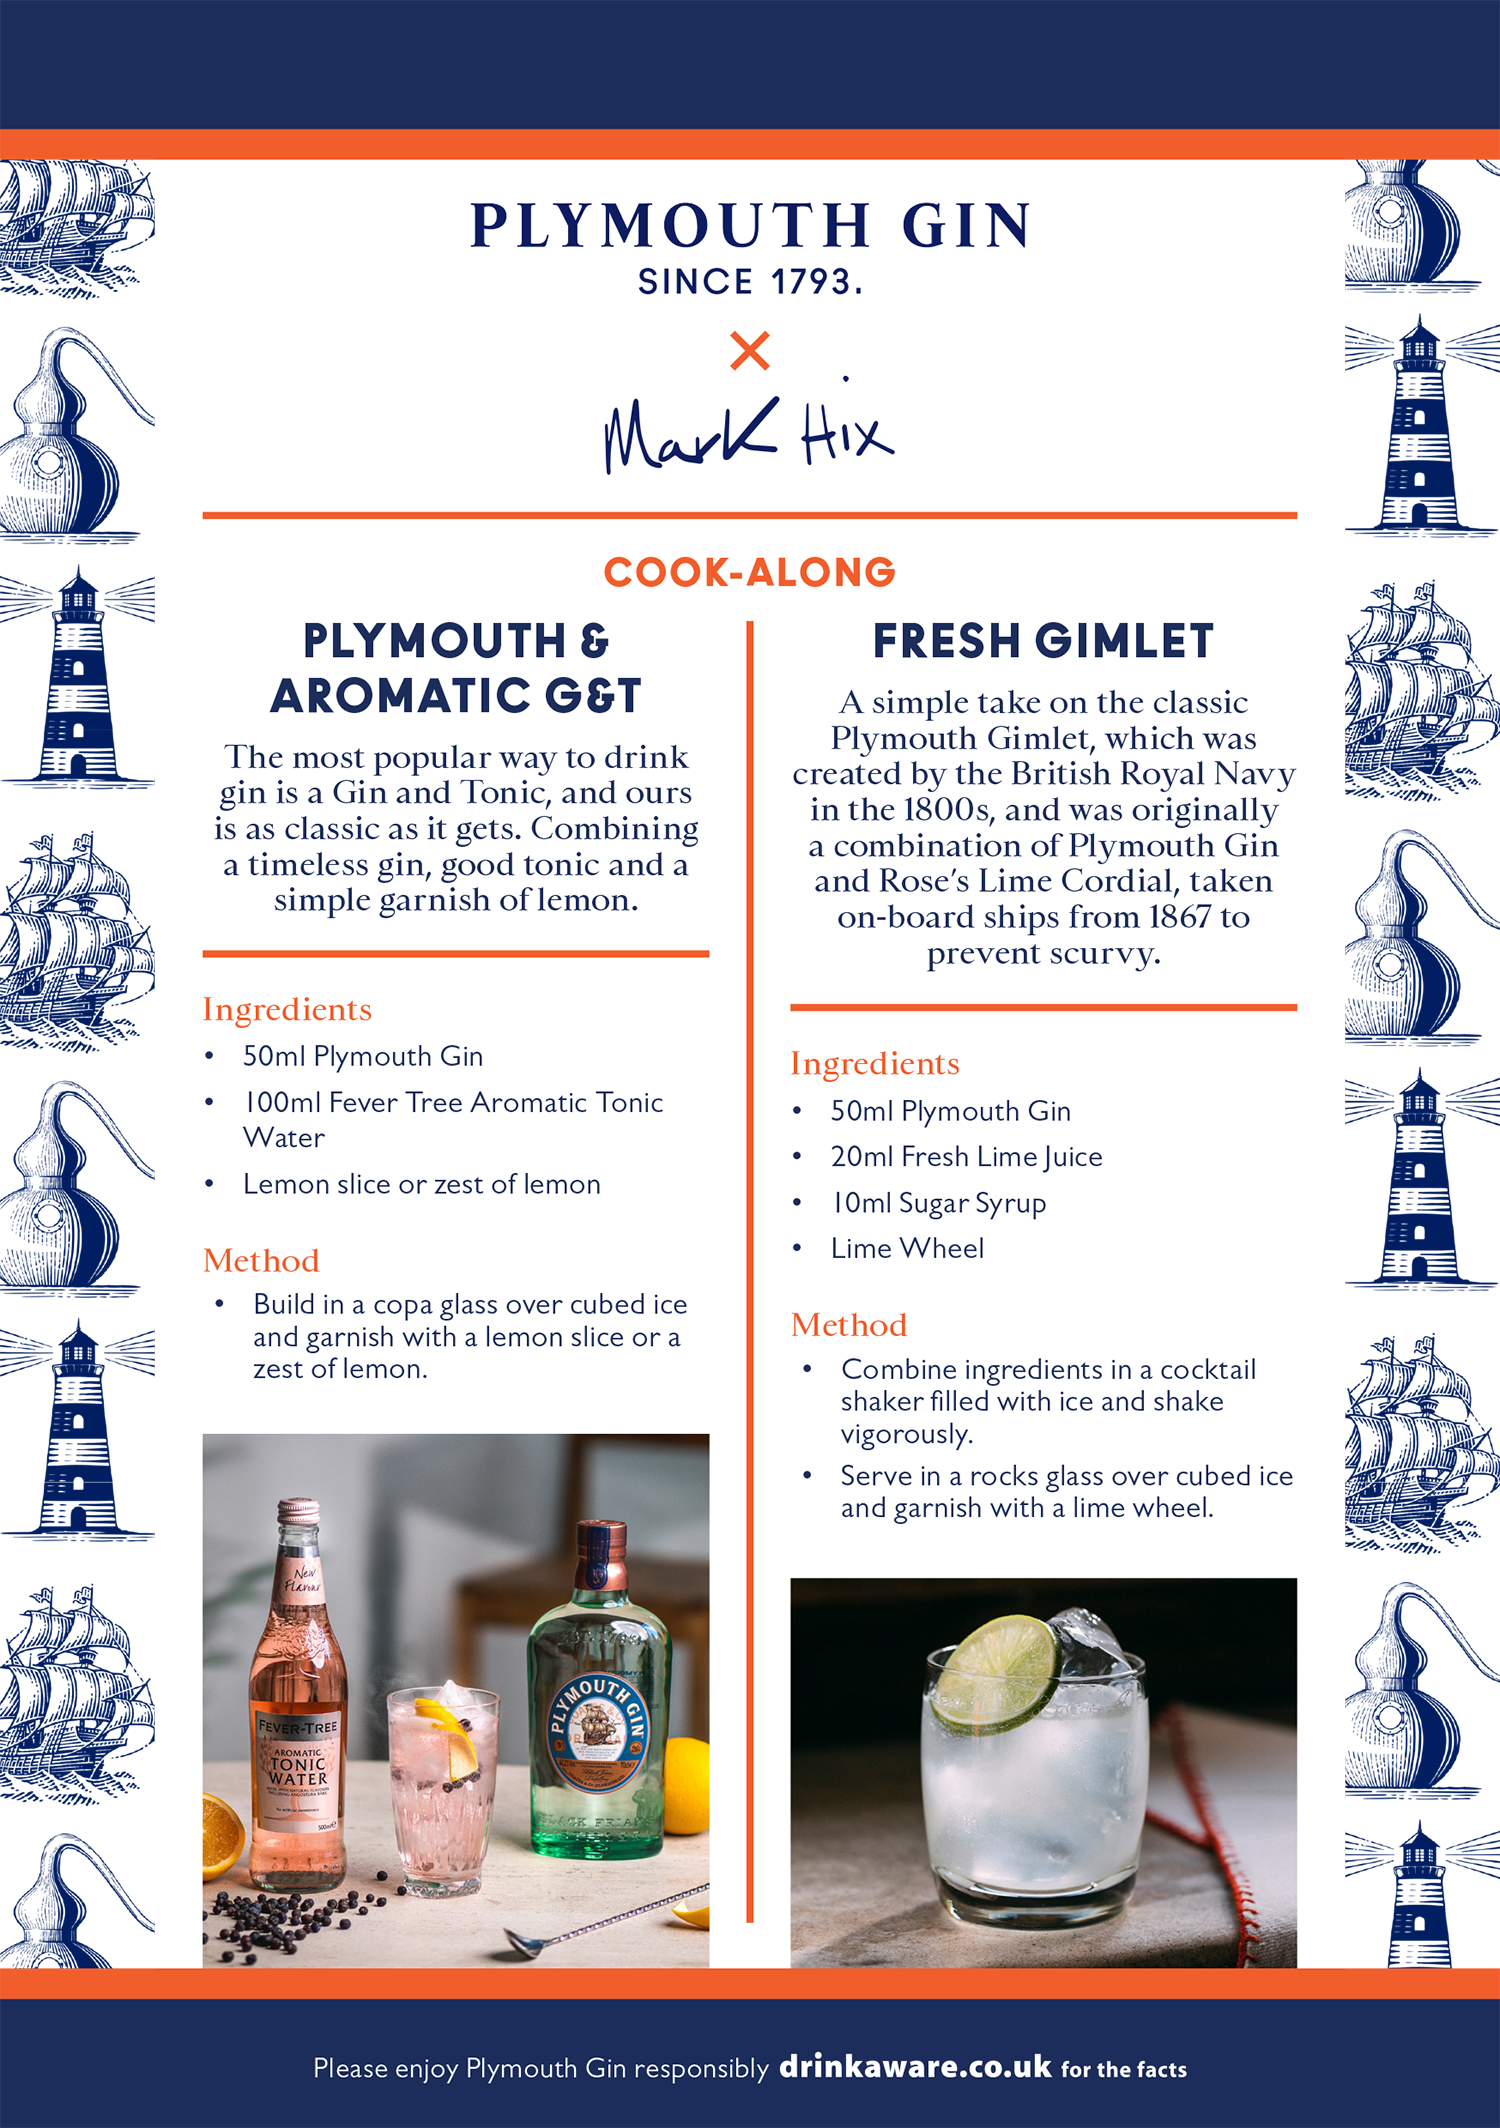 D002110A Plymouth Gin x Mark Hix Cook-along recipe cards_A5-3.png